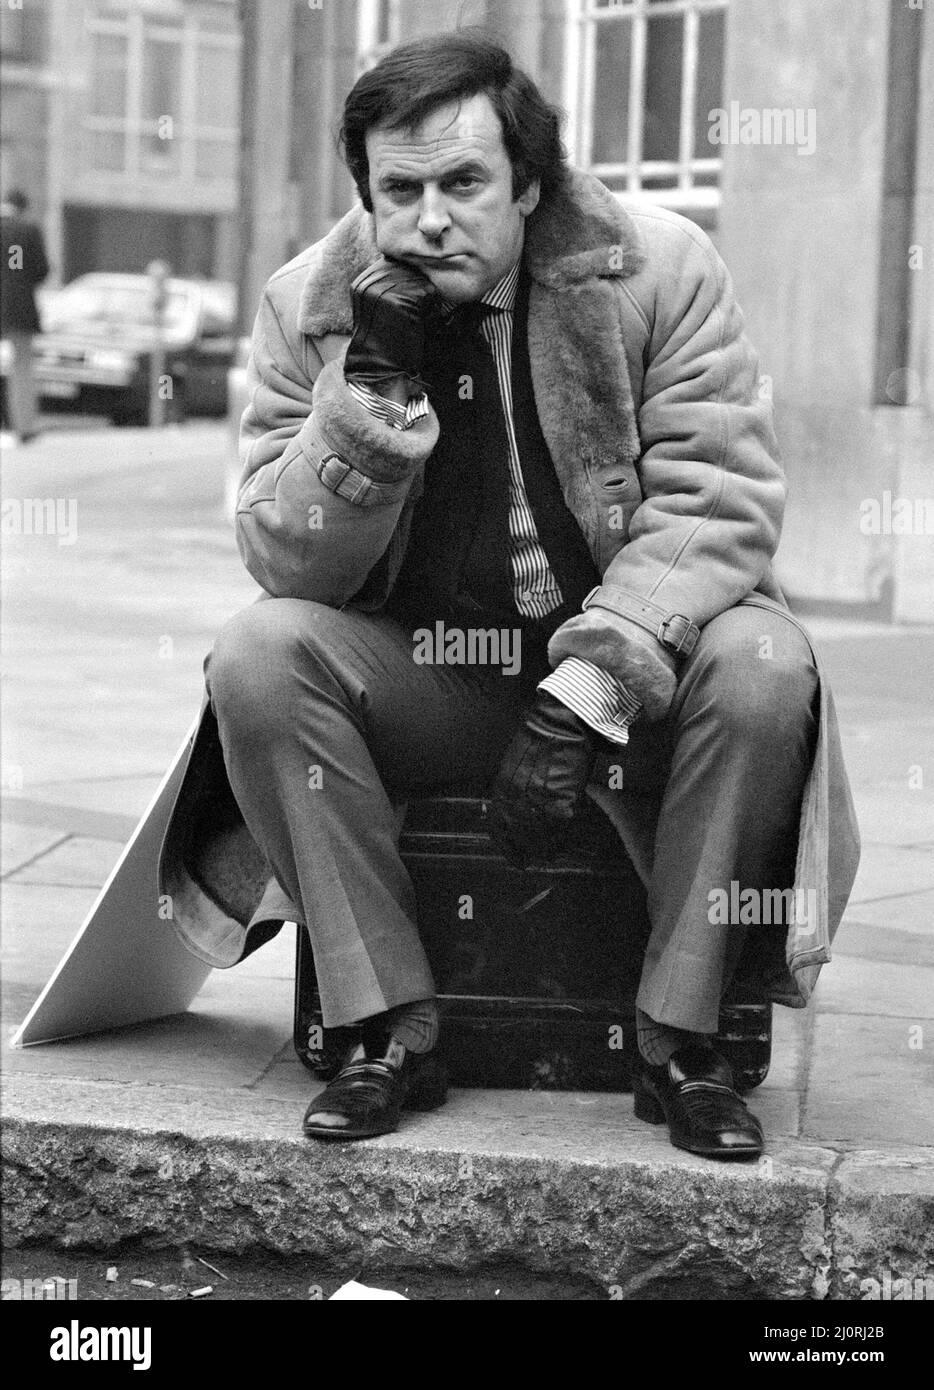 Disc jockey Terry Wogan after being escorted off BBC premises, Broadcasting House, after recording his final programme for BBC Radio Two in December 1984.   Terry Wogan will soon begin filming for a new bbc 1 chat show simply called Wogan. *** Local Caption *** DJ Stock Photo